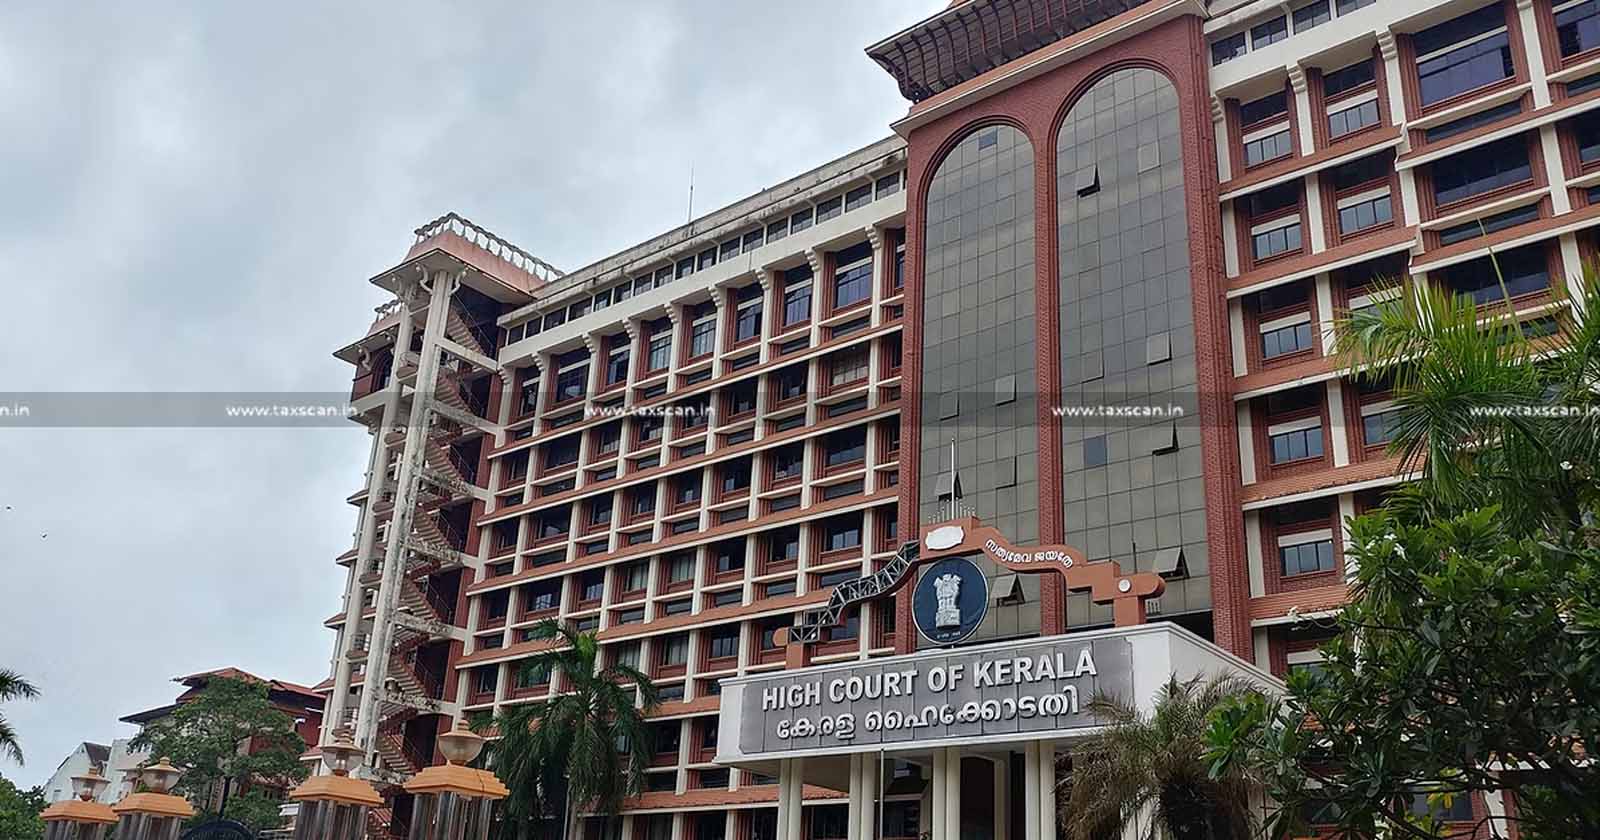 Kerala High Court judgment on GST rules - Constitutional validity of GST regulations - Legal implications of Kerala HC ruling on GST - Kerala high court - Taxscan